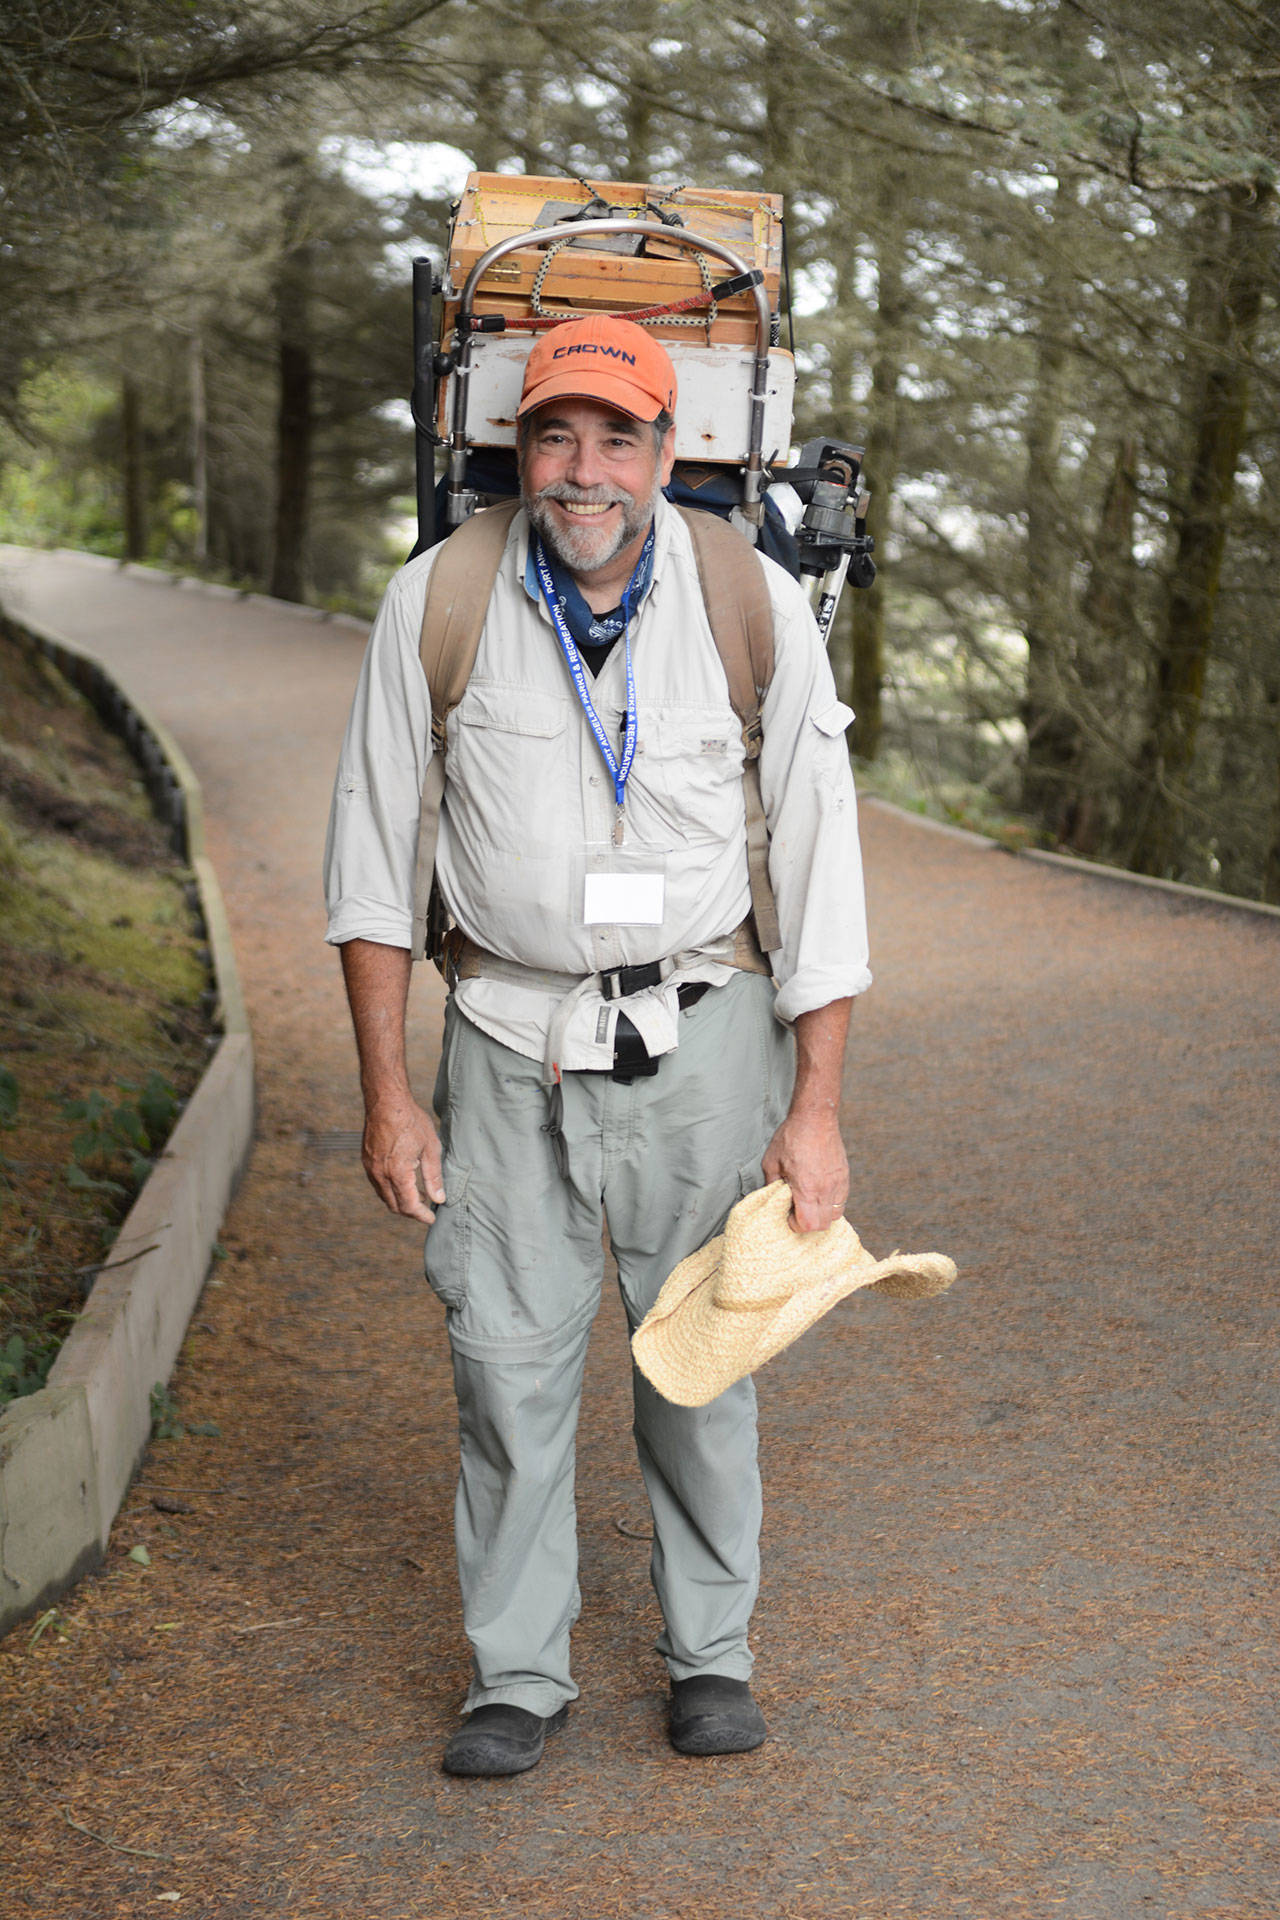 Robin Weiss of Poulsbo hikes into his Paint the Peninsula locations, gear and snacks on his back. During this year’s event Aug. 21-27, he hopes to paint at Cape Flattery. (Port Angeles Fine Arts Center)